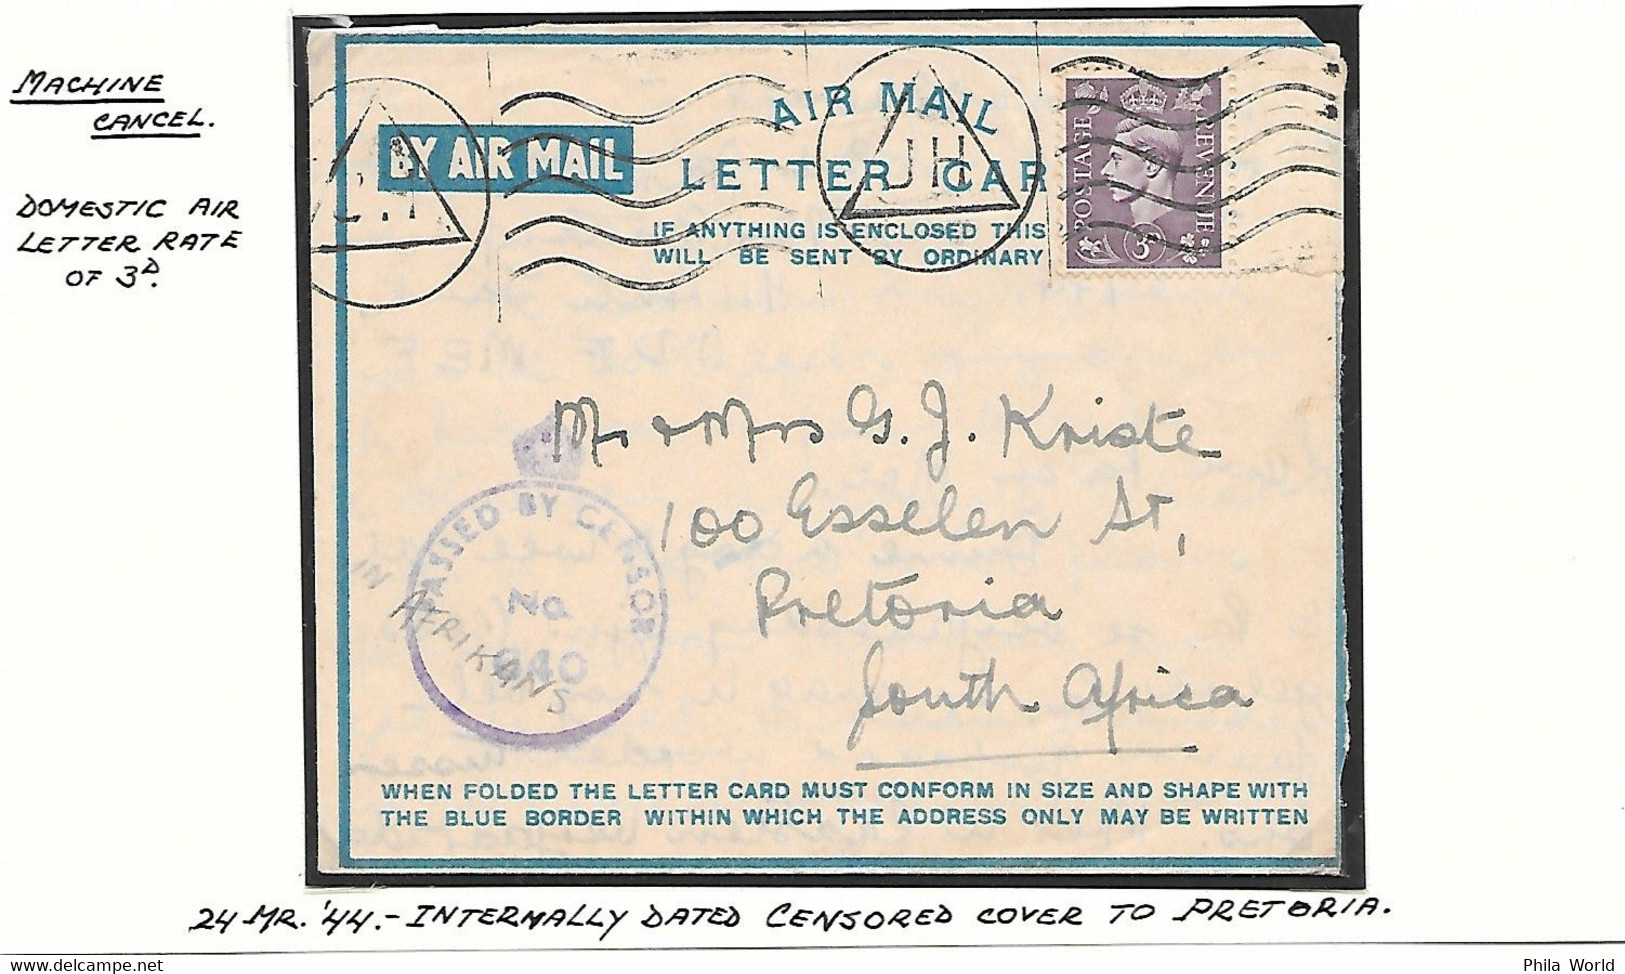 MARITIME MAIL WW2 JH Triangle Machine Cancel DURBAN 1944 WW2 Air Letter Card SOUTH AFRICA British NAVAL Censored - Lettres & Documents